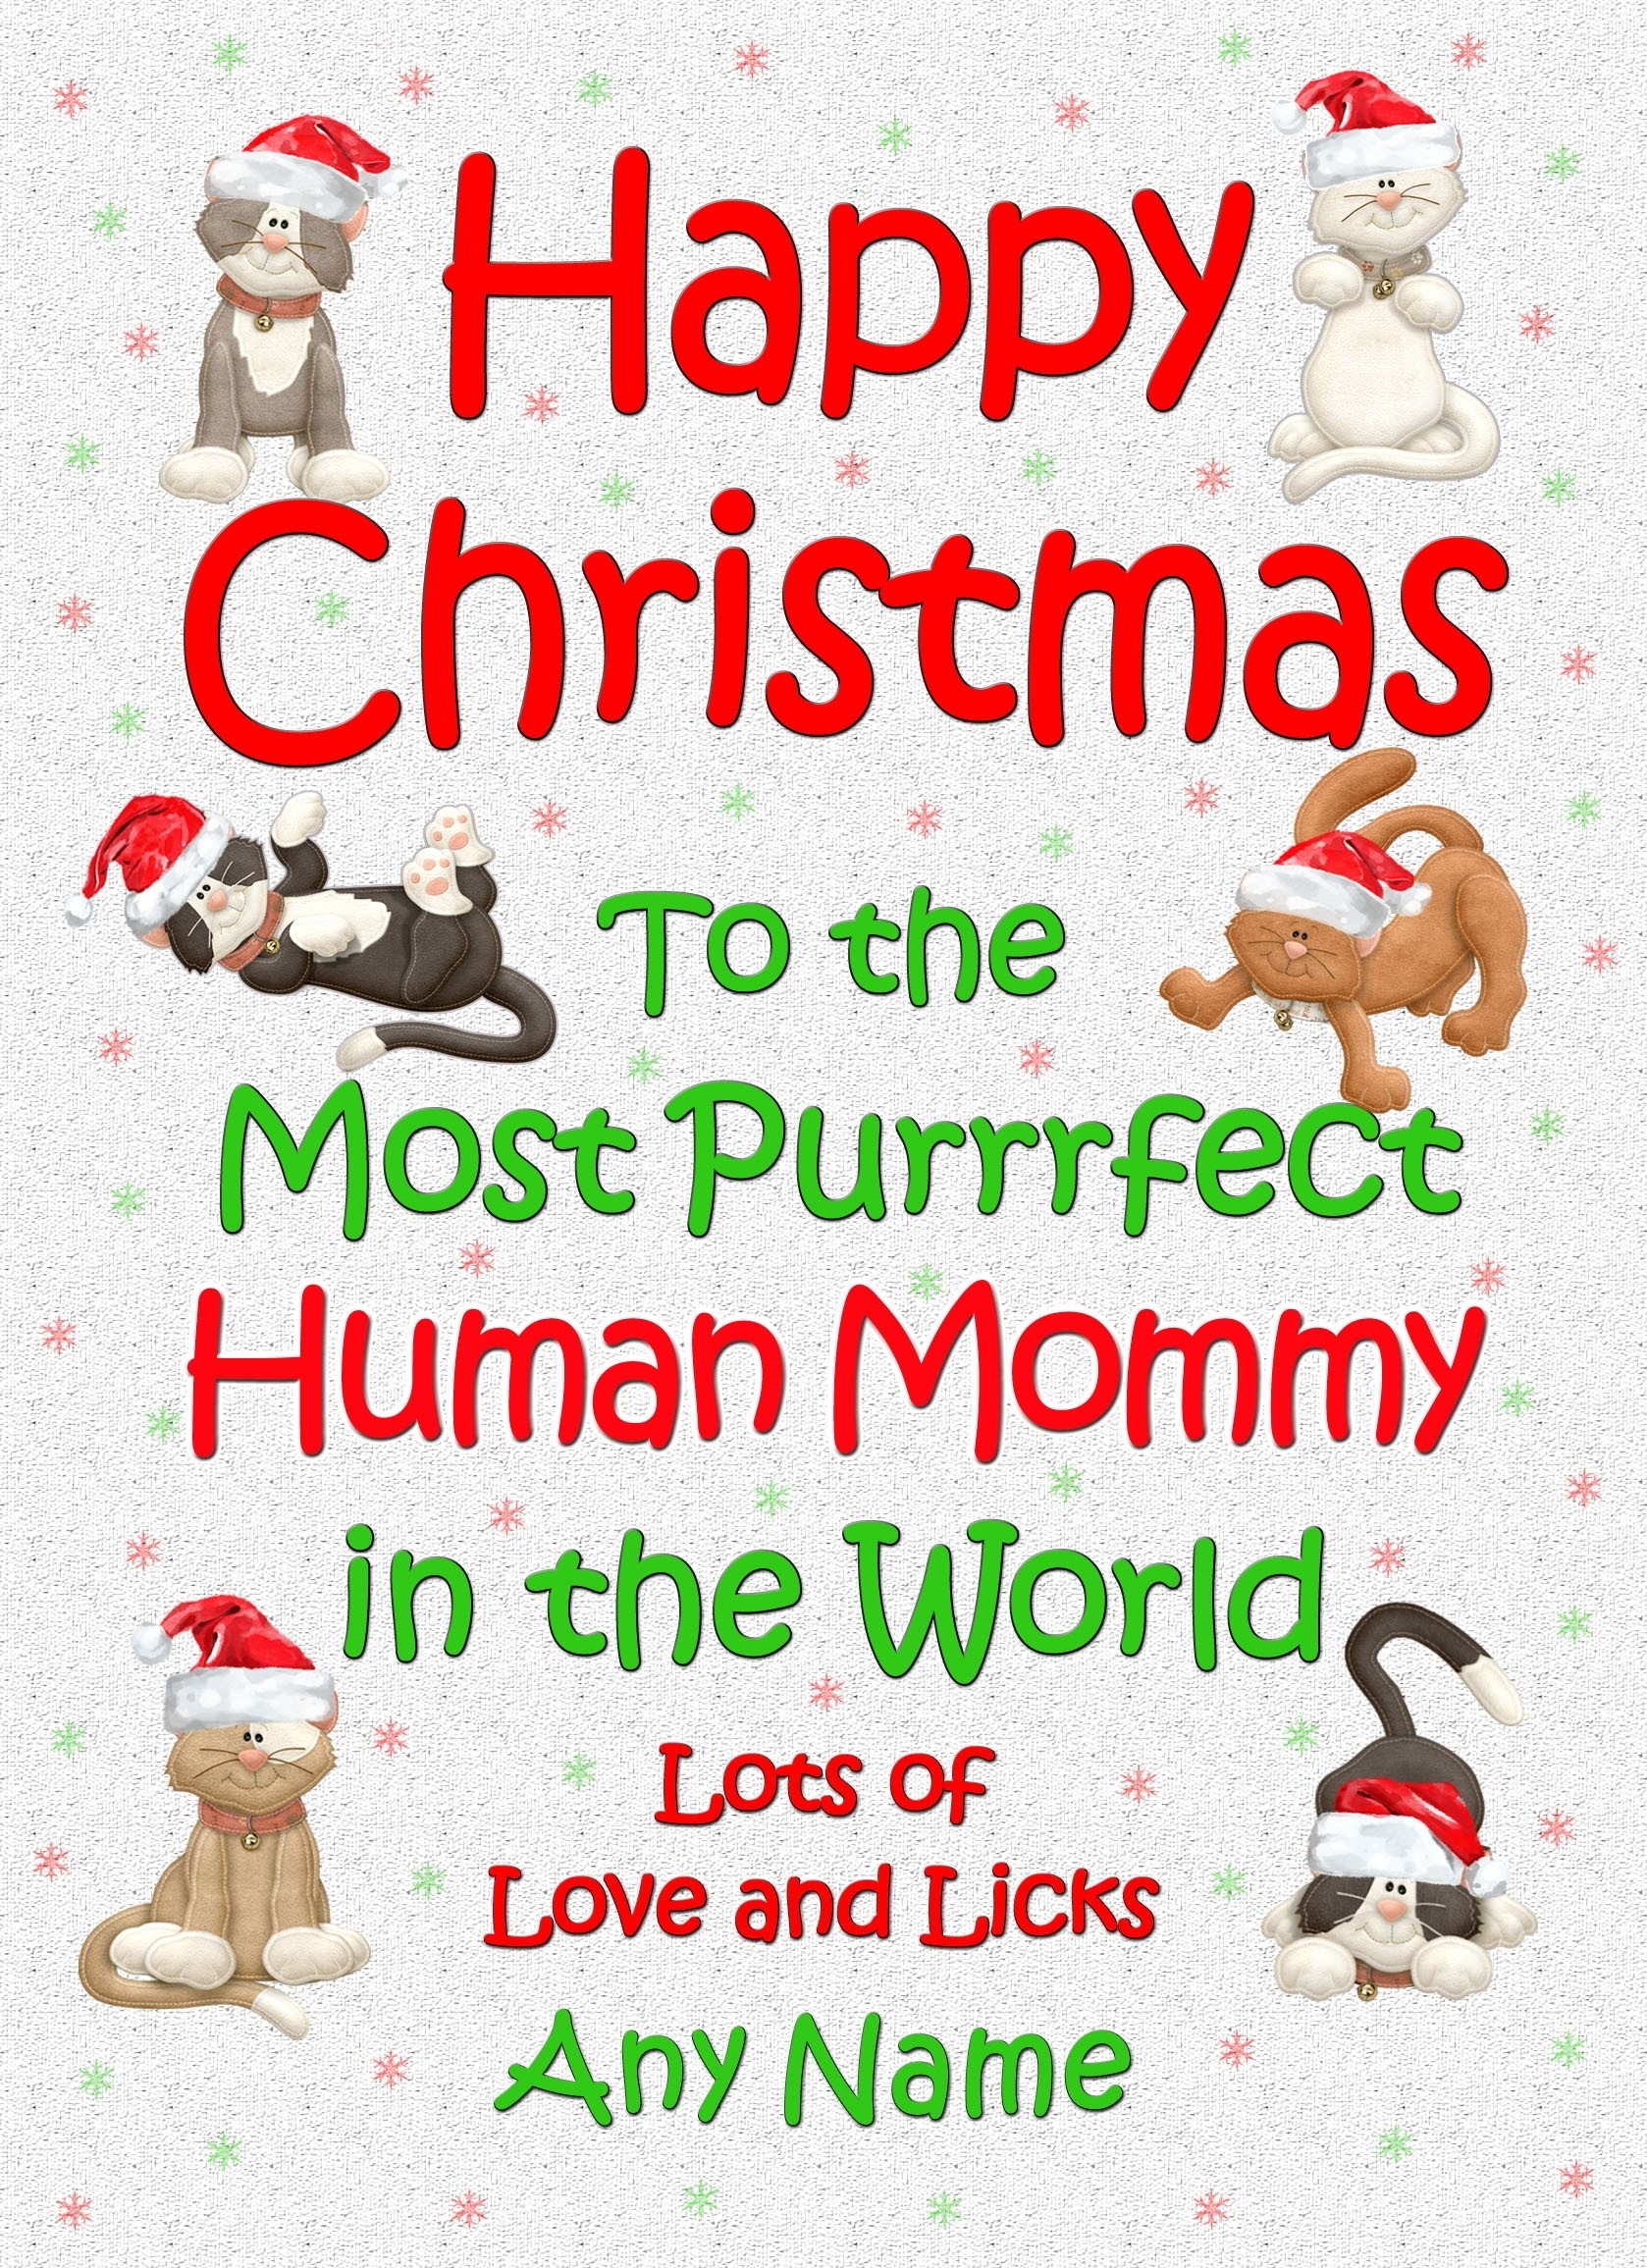 Personalised From the Cat Christmas Card (Human Mommy, White)